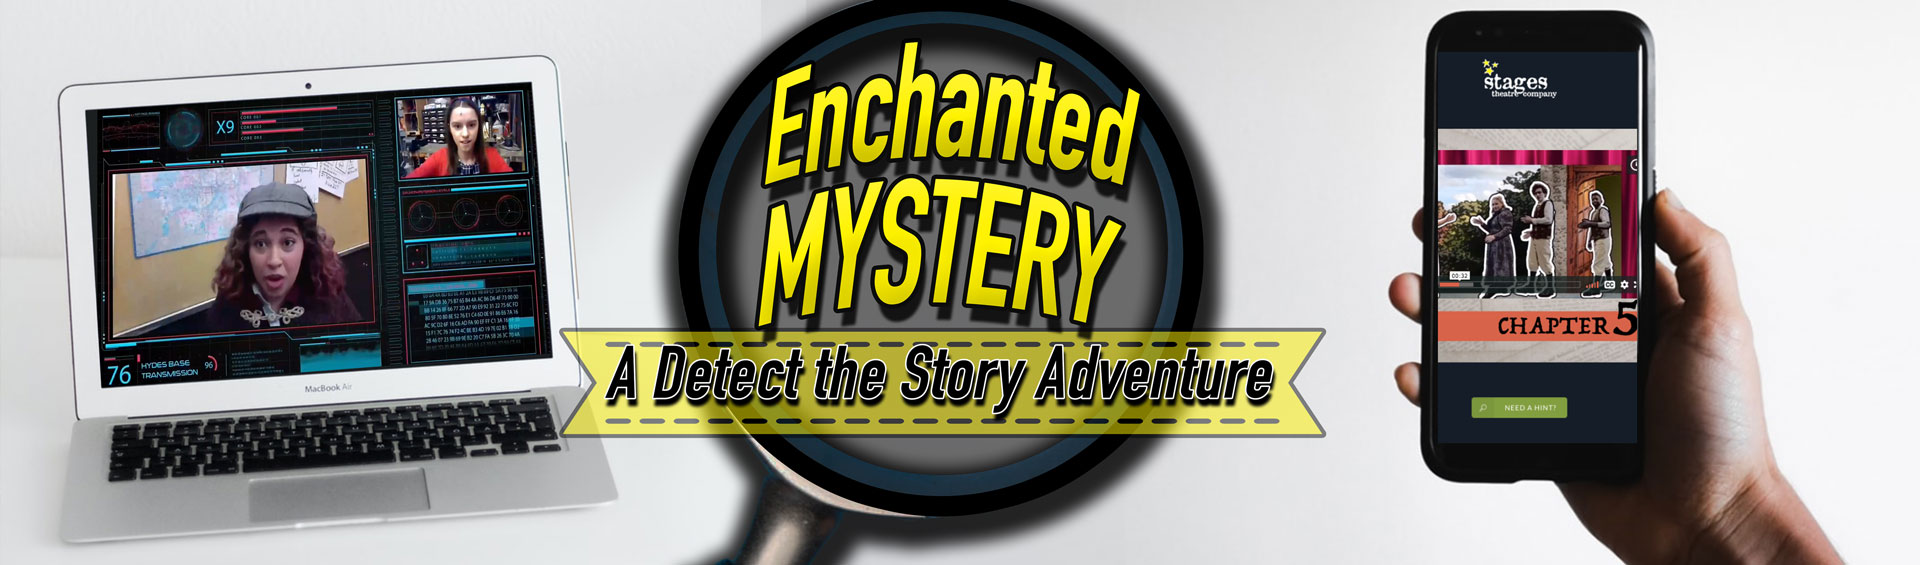 ENCHANTED MYSTERY: A Detect the Story Adventure